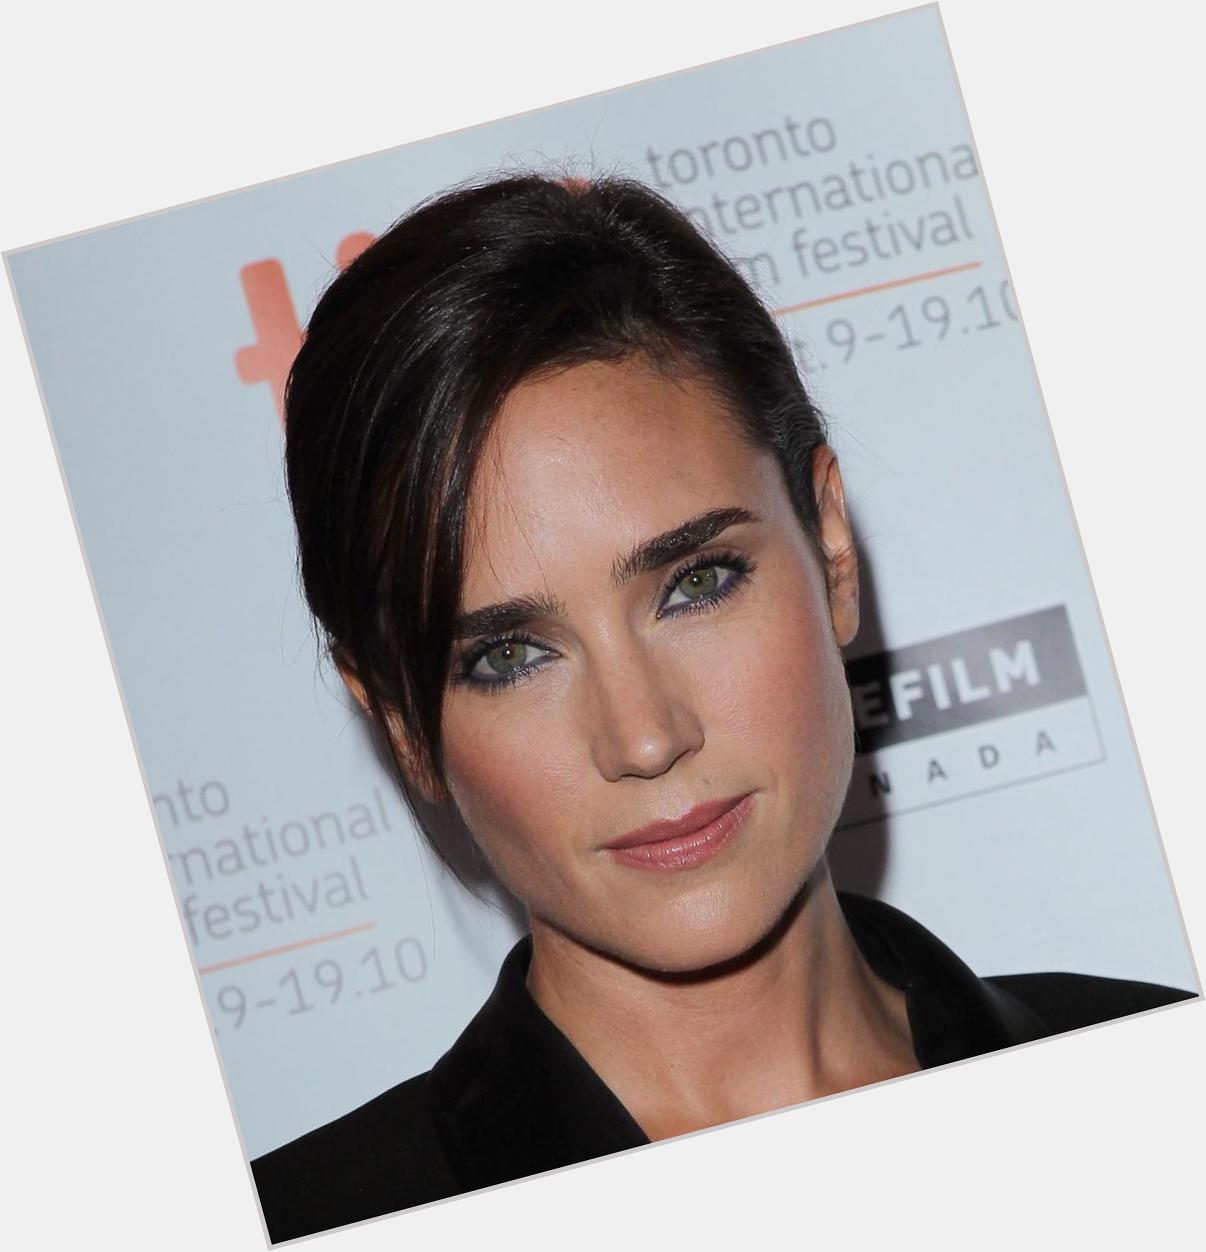 Happy birthday to the beautiful Jennifer Connelly! 